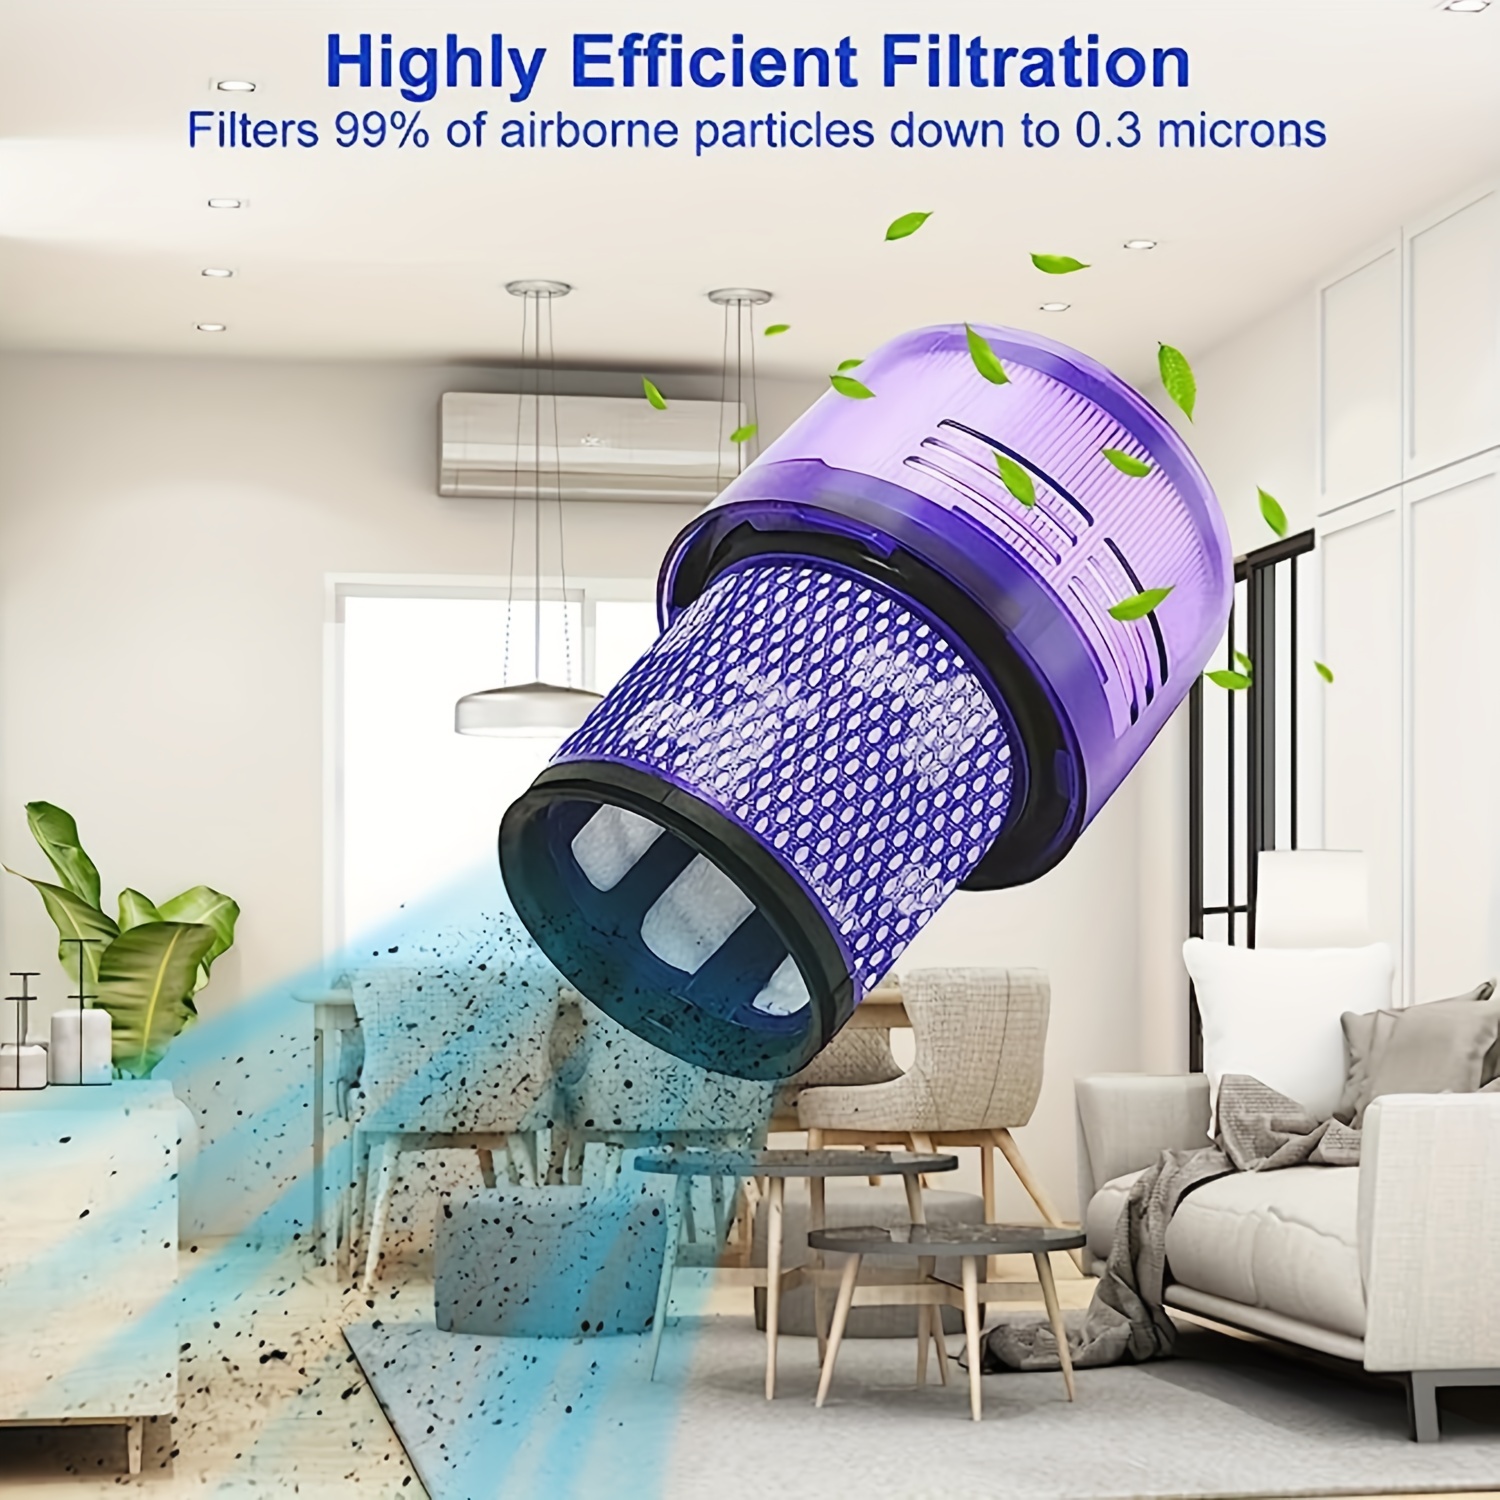  Filter Replacement for Dyson V11 Torque Drive V11 Animal V11  Extra V15 Detect Cordless Vacuum Cleaner, Compare to Part 970013-02 (3  Pack) : Home & Kitchen